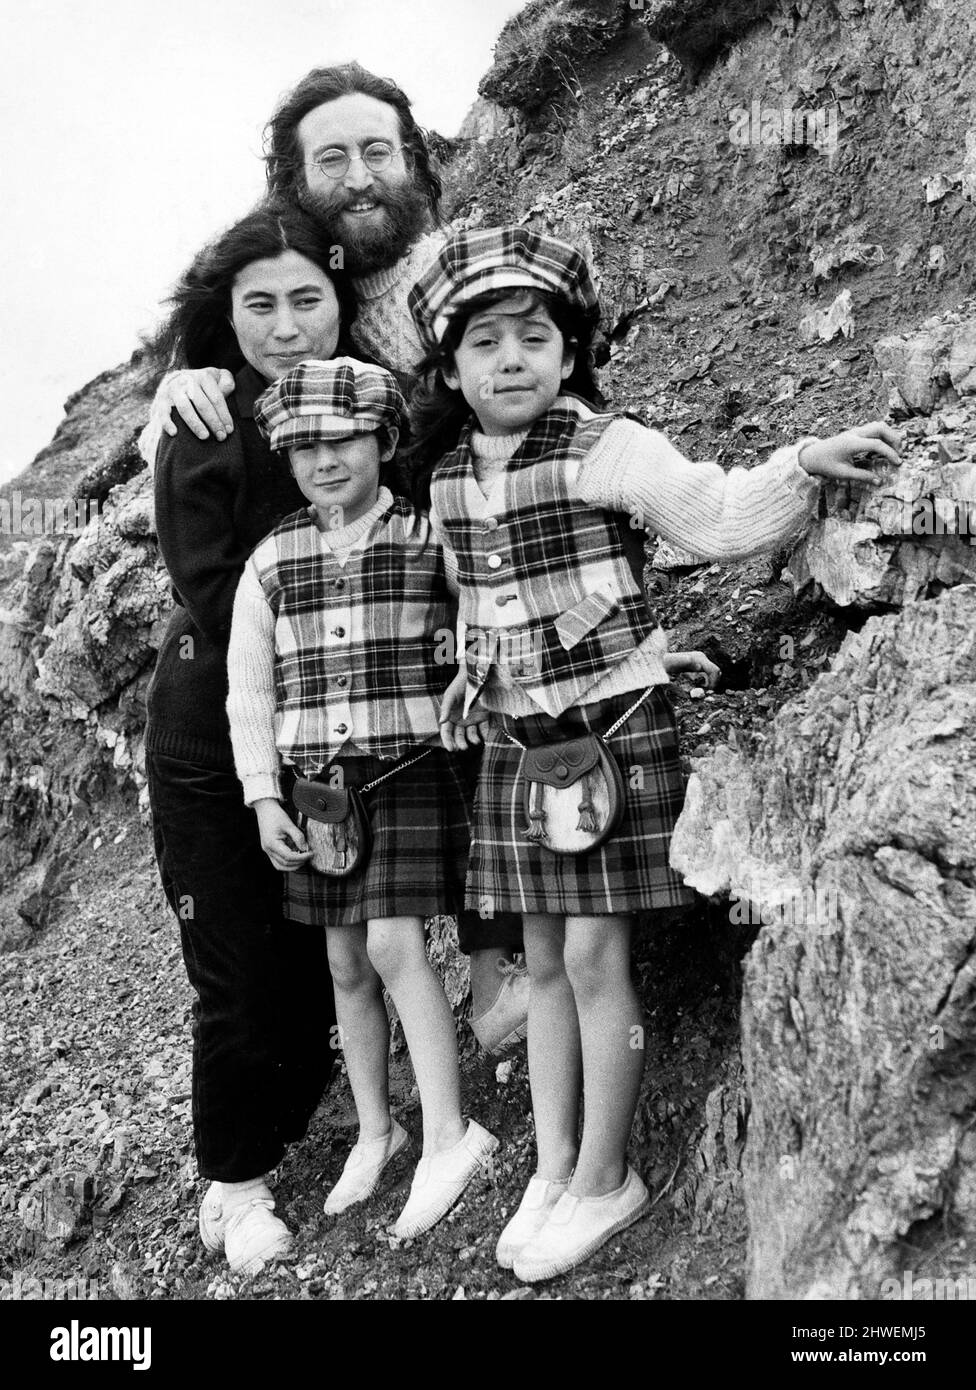 Yoko Ono  and John Lennon stand on mountain side with Julian Lennon and Kyoko. Both children dressed in kilts tartan caps and waistcoats Pictured 2nd July 1969. Stock Photo